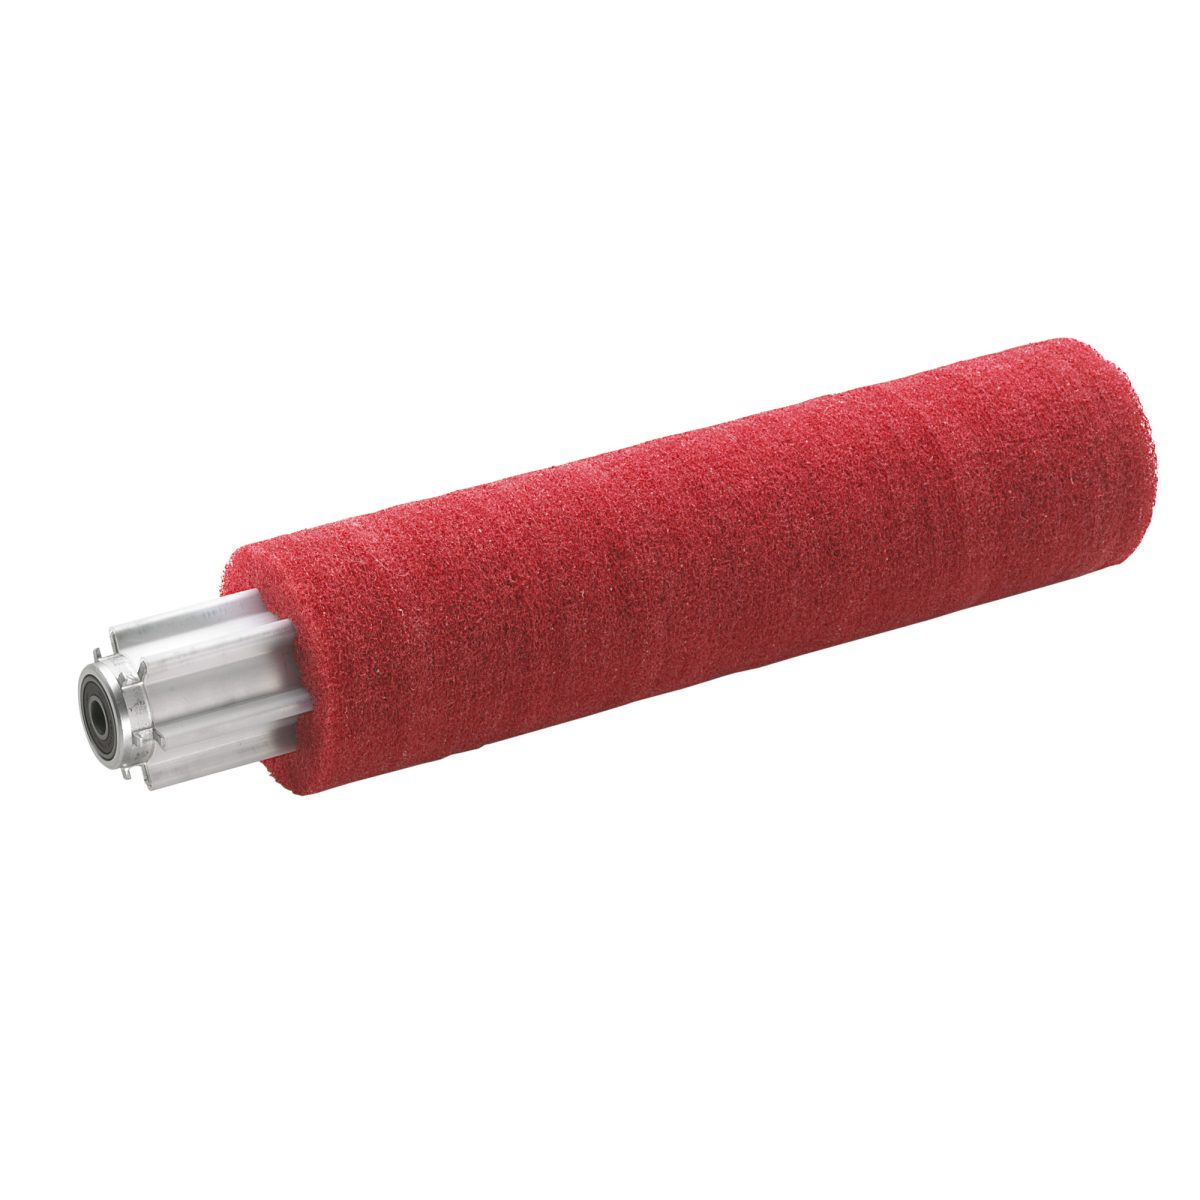 Roller Pad Sleeve, Medium, Red, for BR 40/10